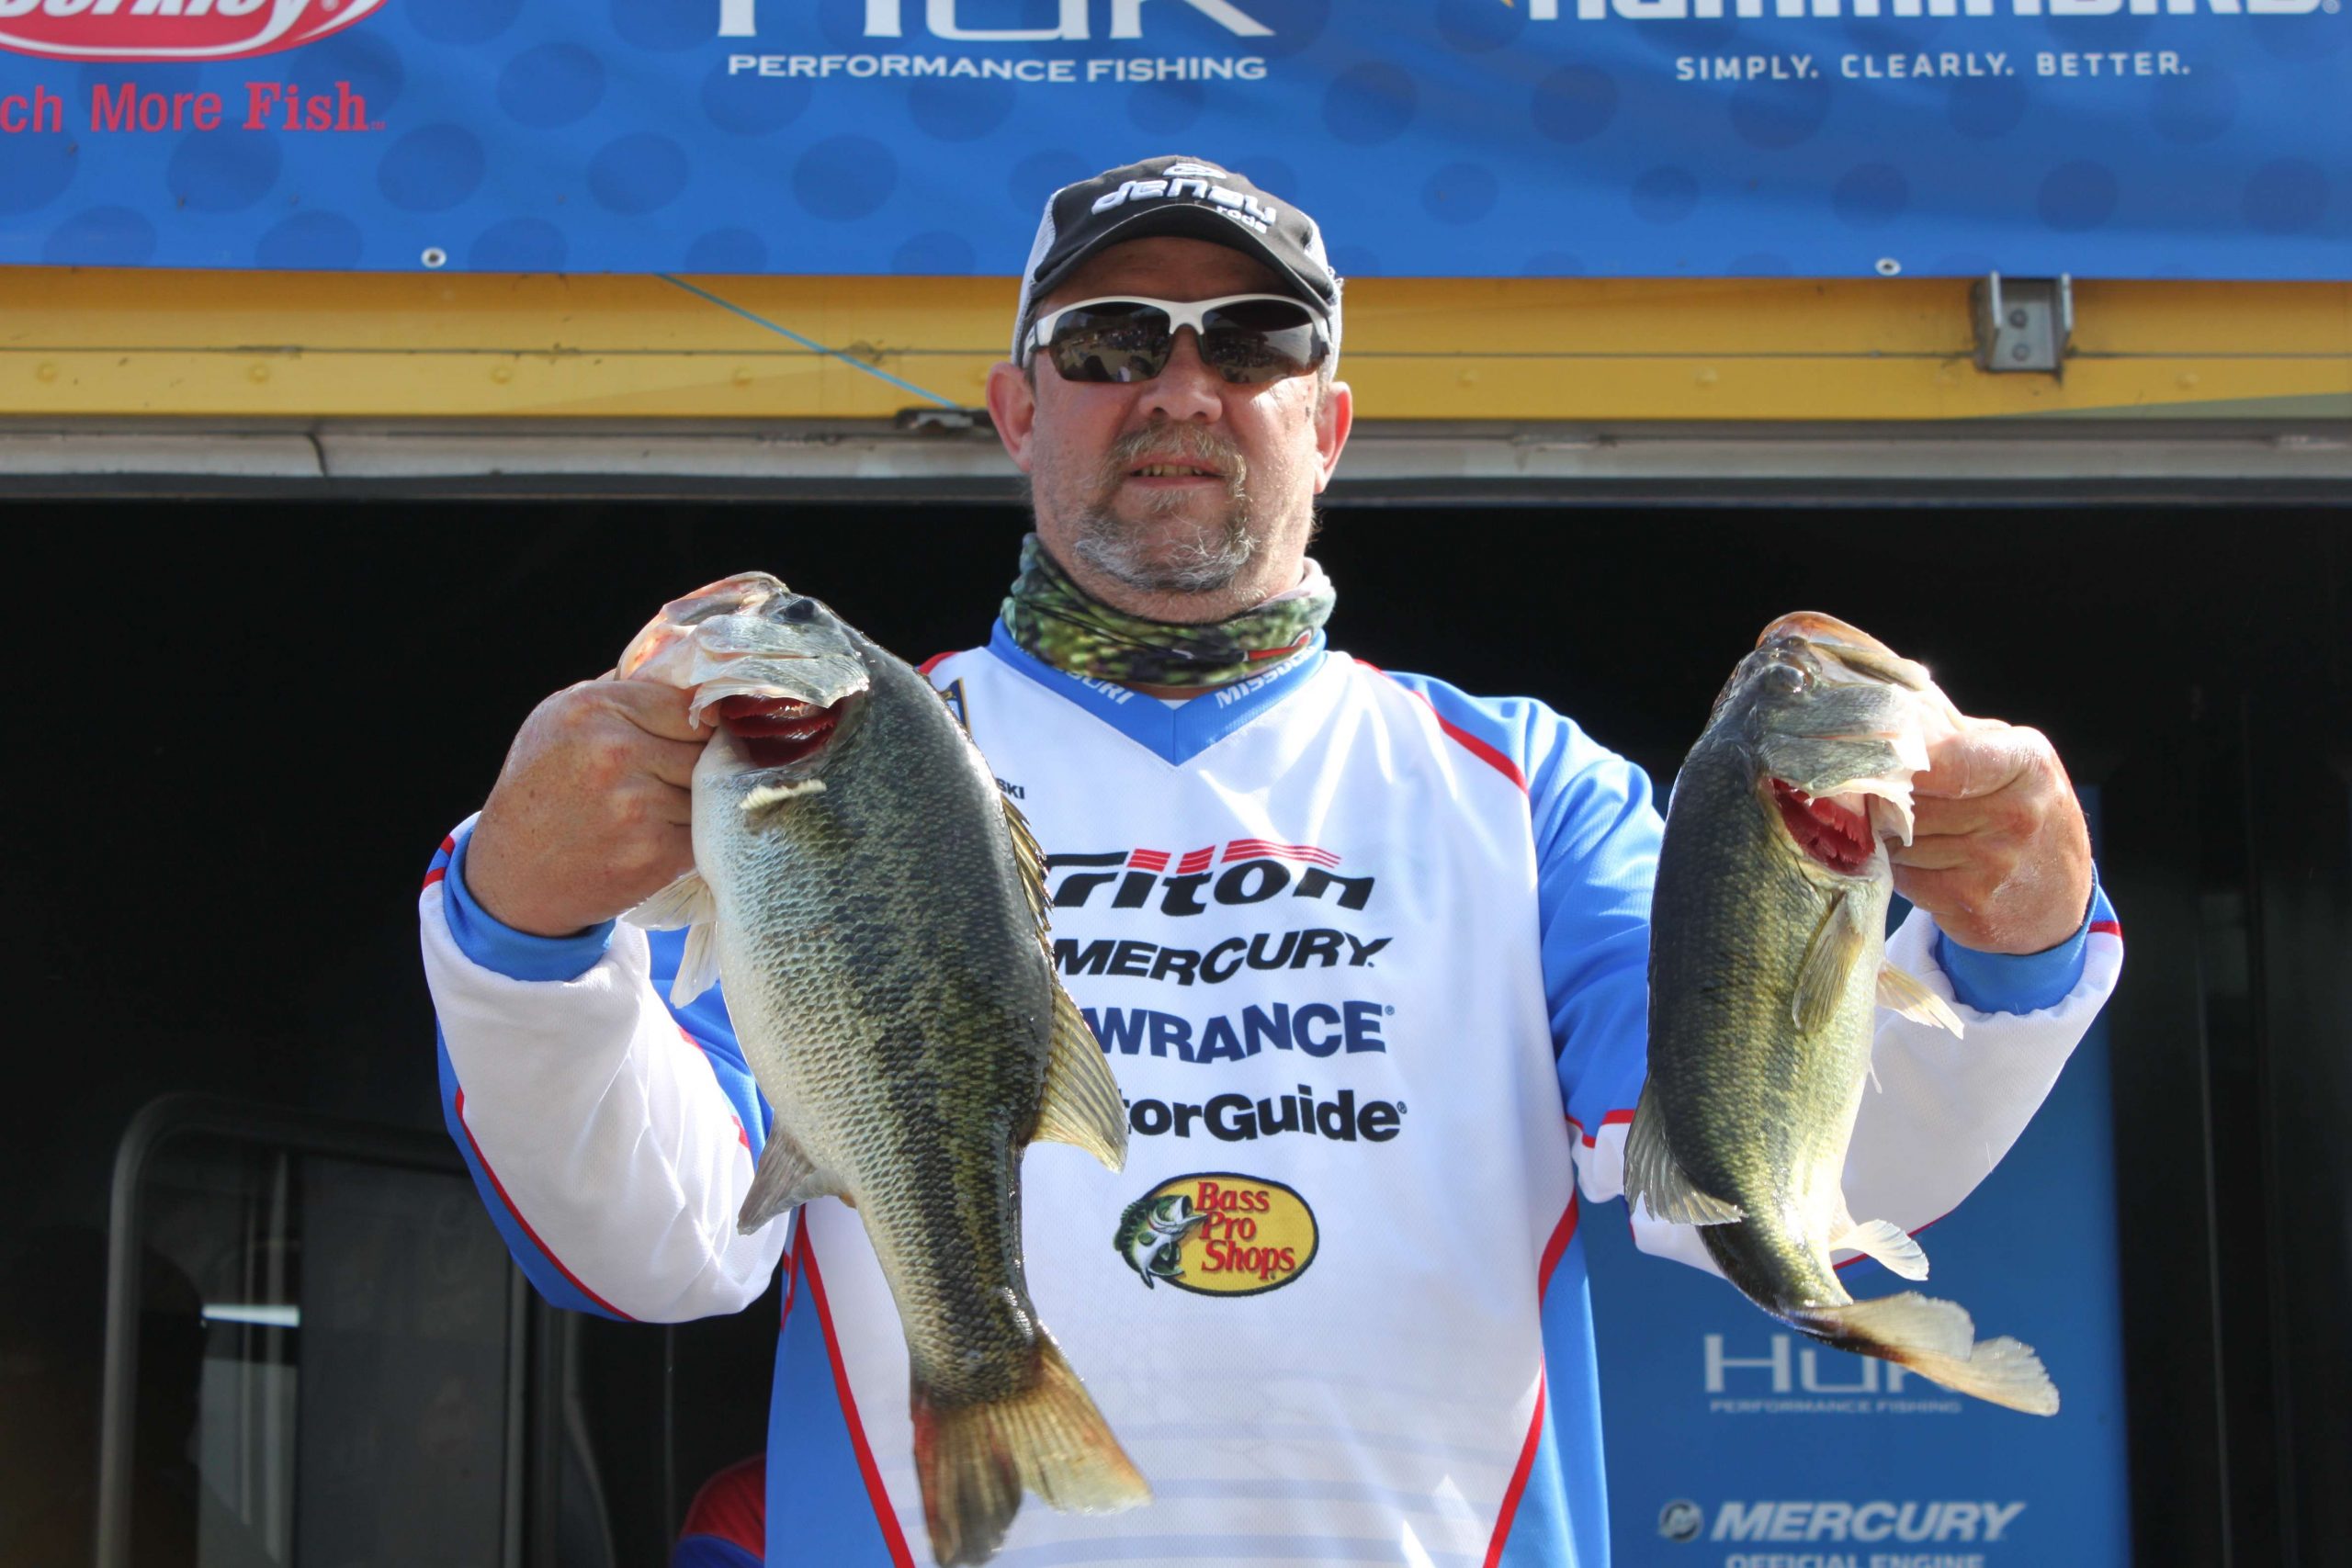 Mike Szczechowski of Missouri was 11th in the non-boater division with 24-13. 